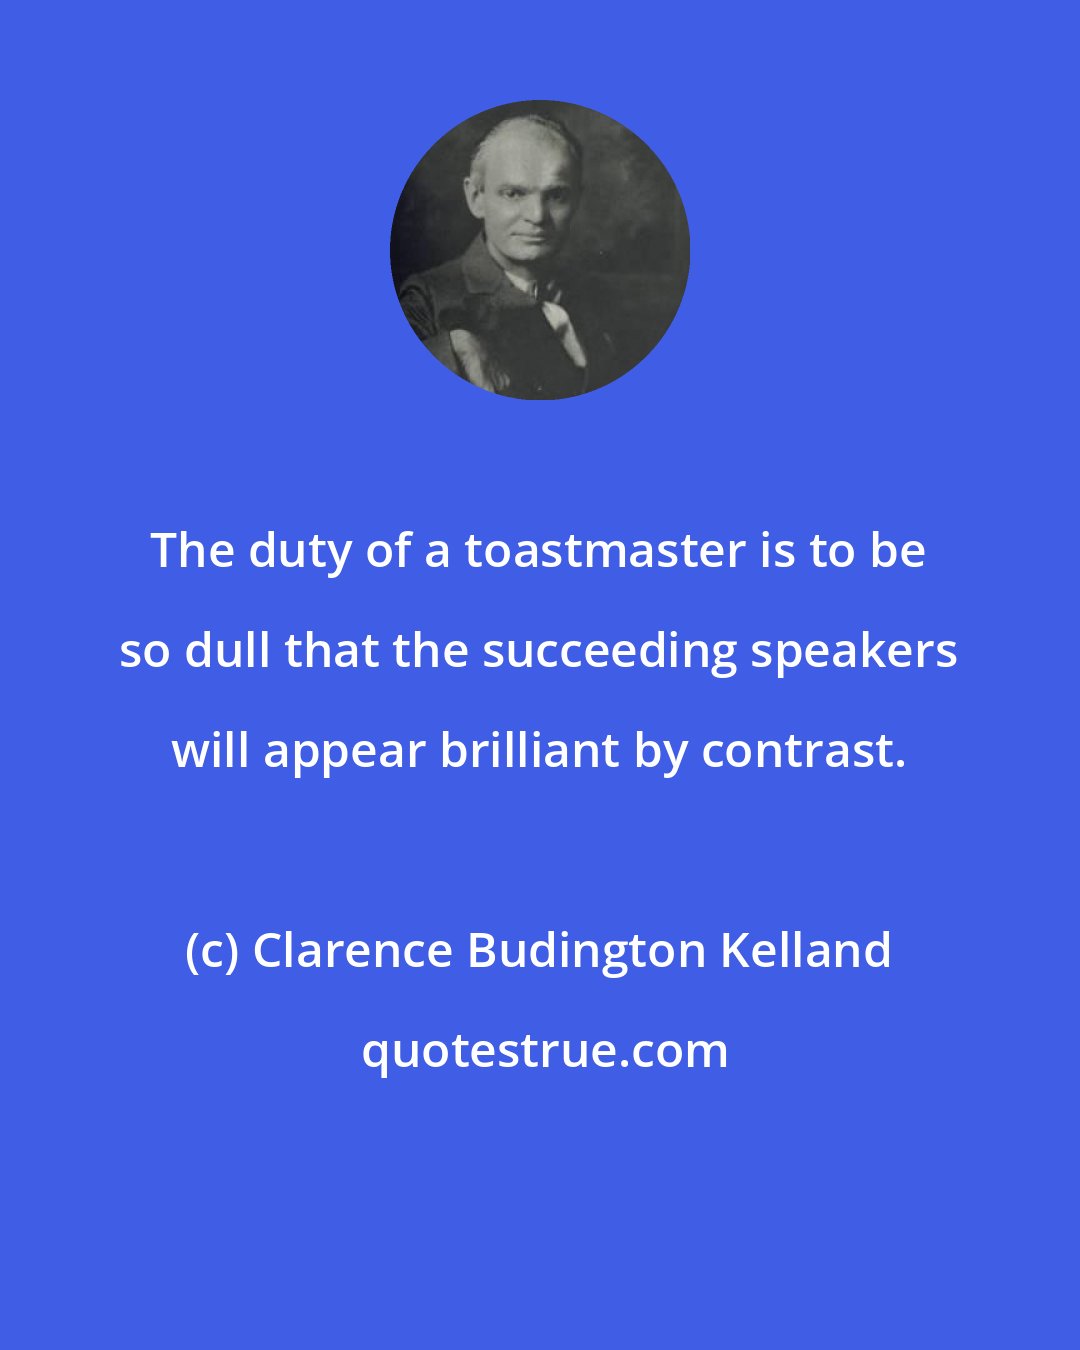 Clarence Budington Kelland: The duty of a toastmaster is to be so dull that the succeeding speakers will appear brilliant by contrast.